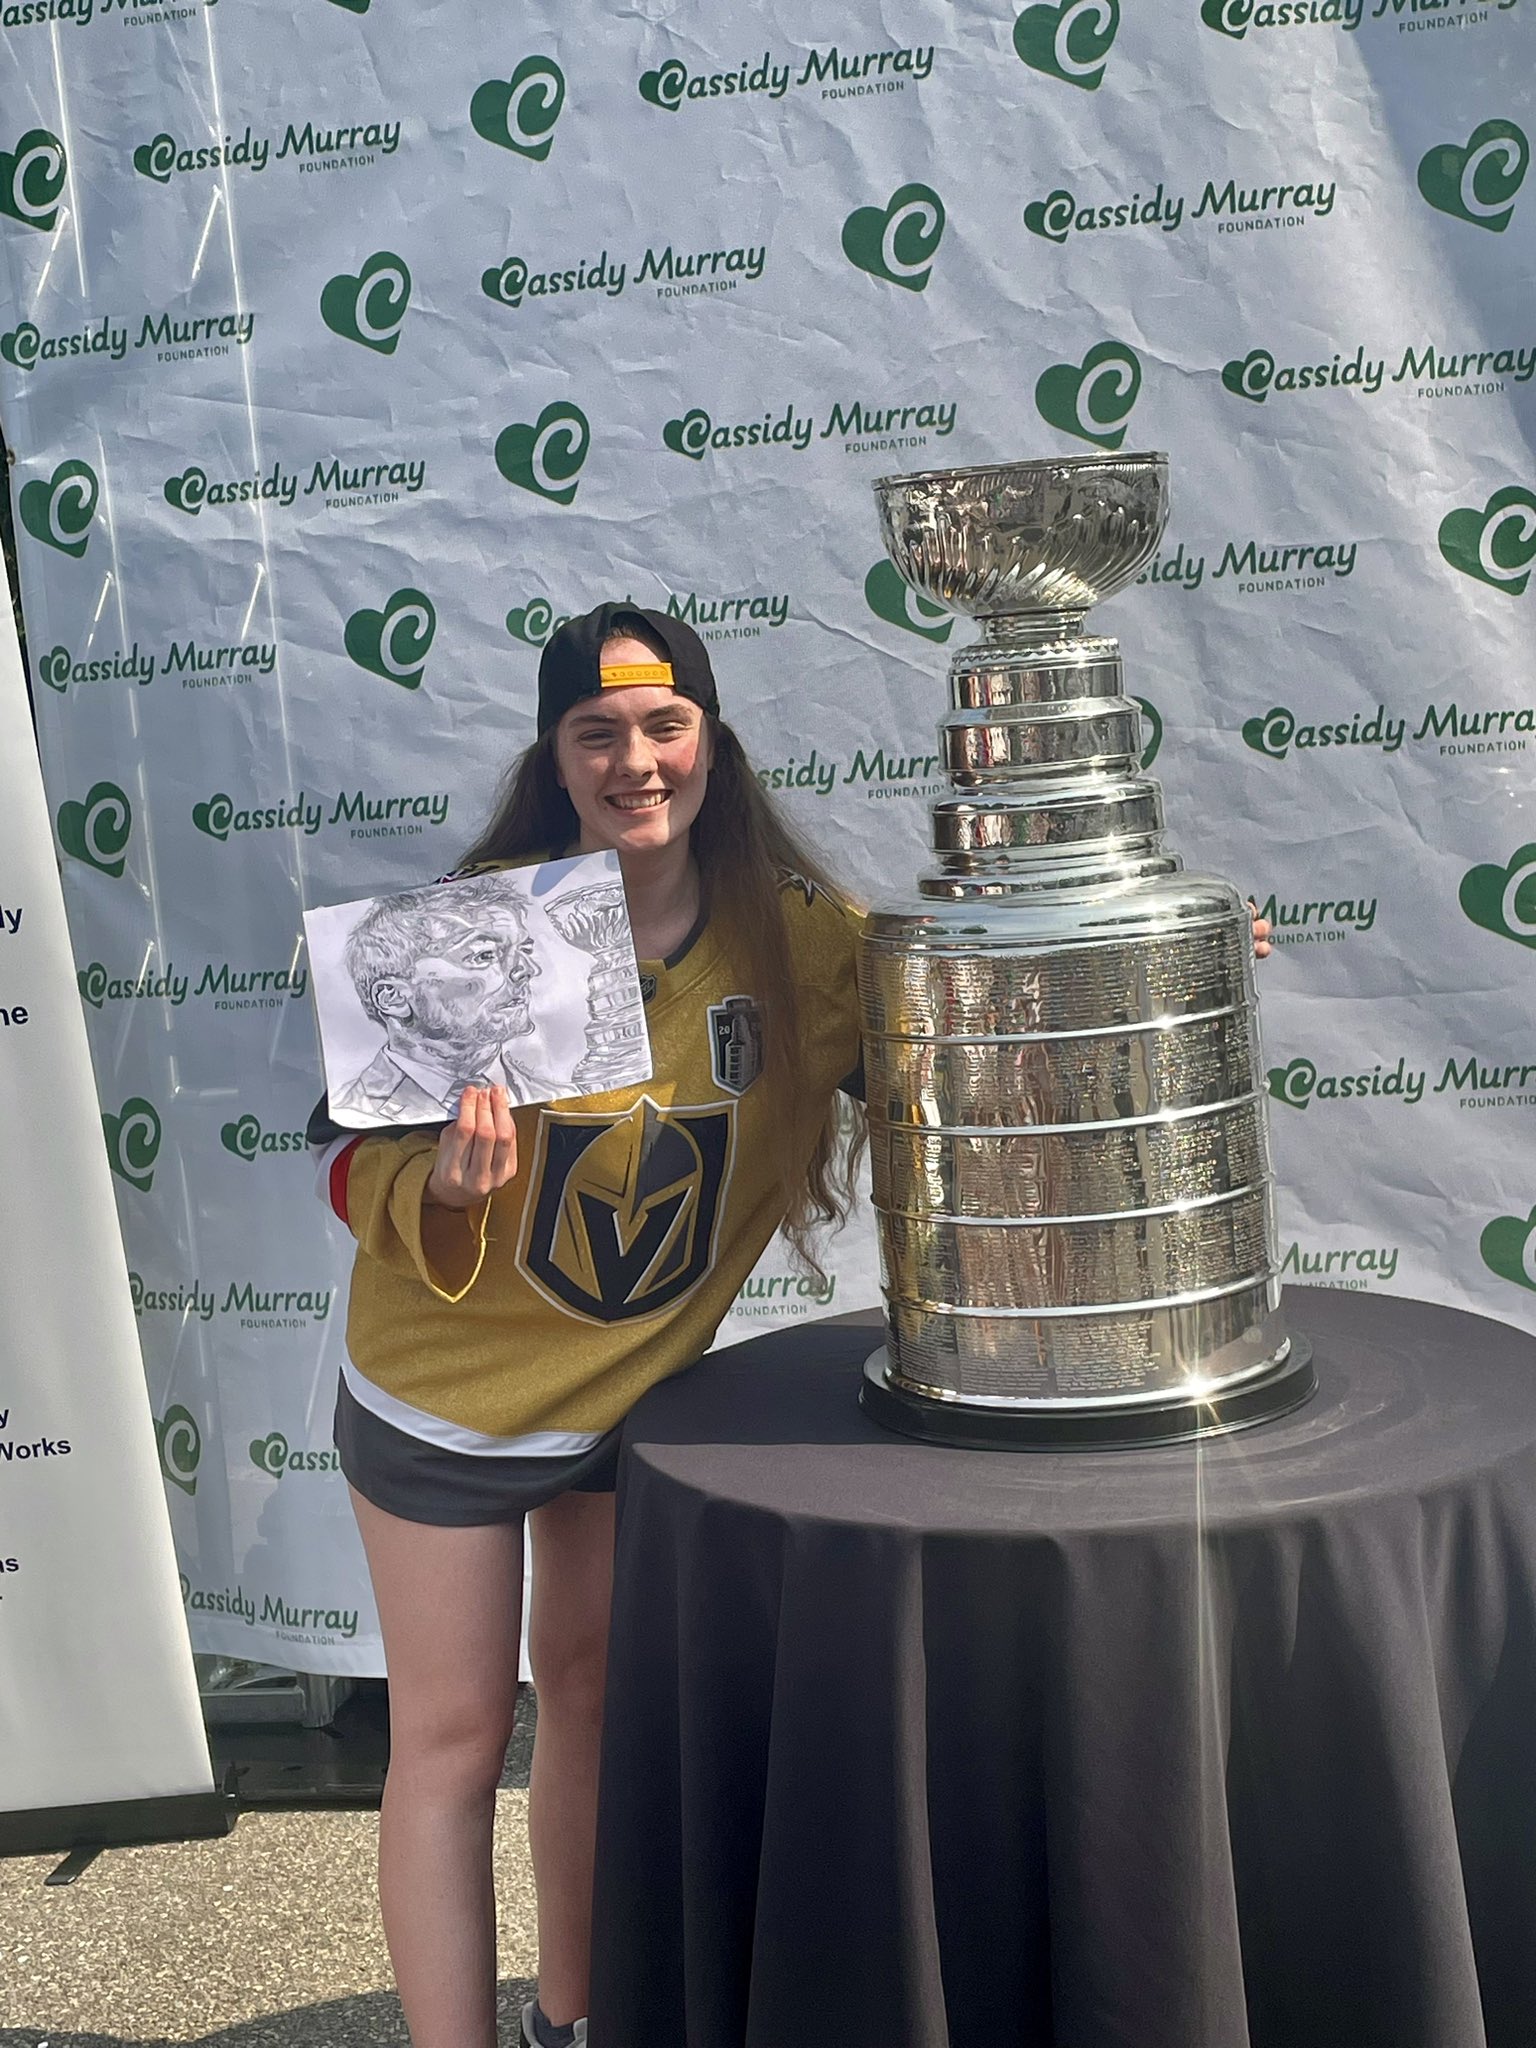 ✨Some Stanley cups I thought were cute today. #stanleycup